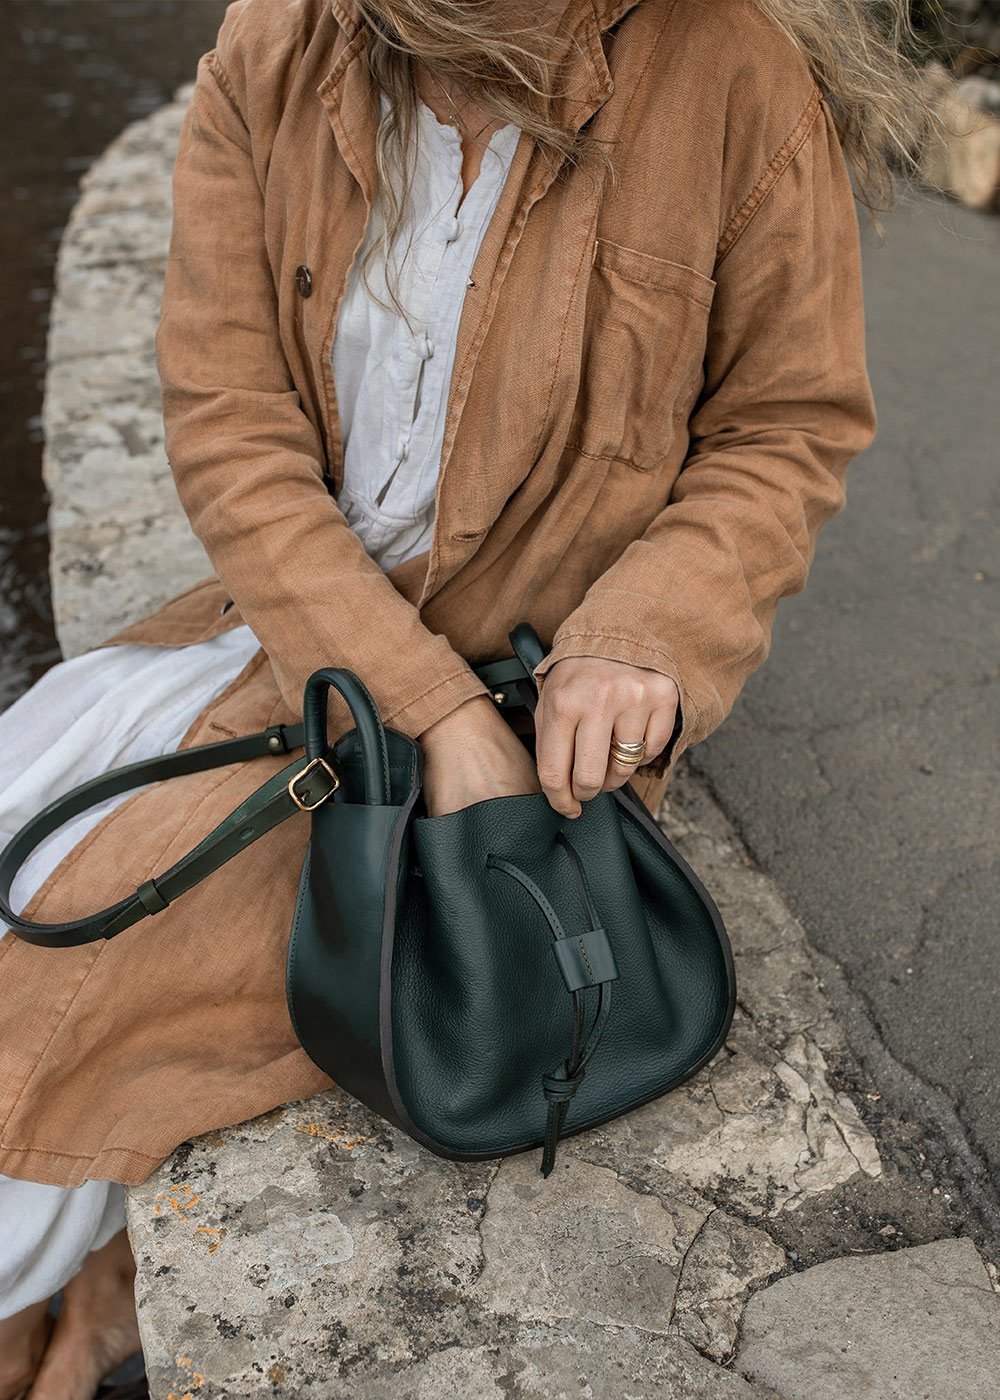 A woman is looking for something in her leather handbag